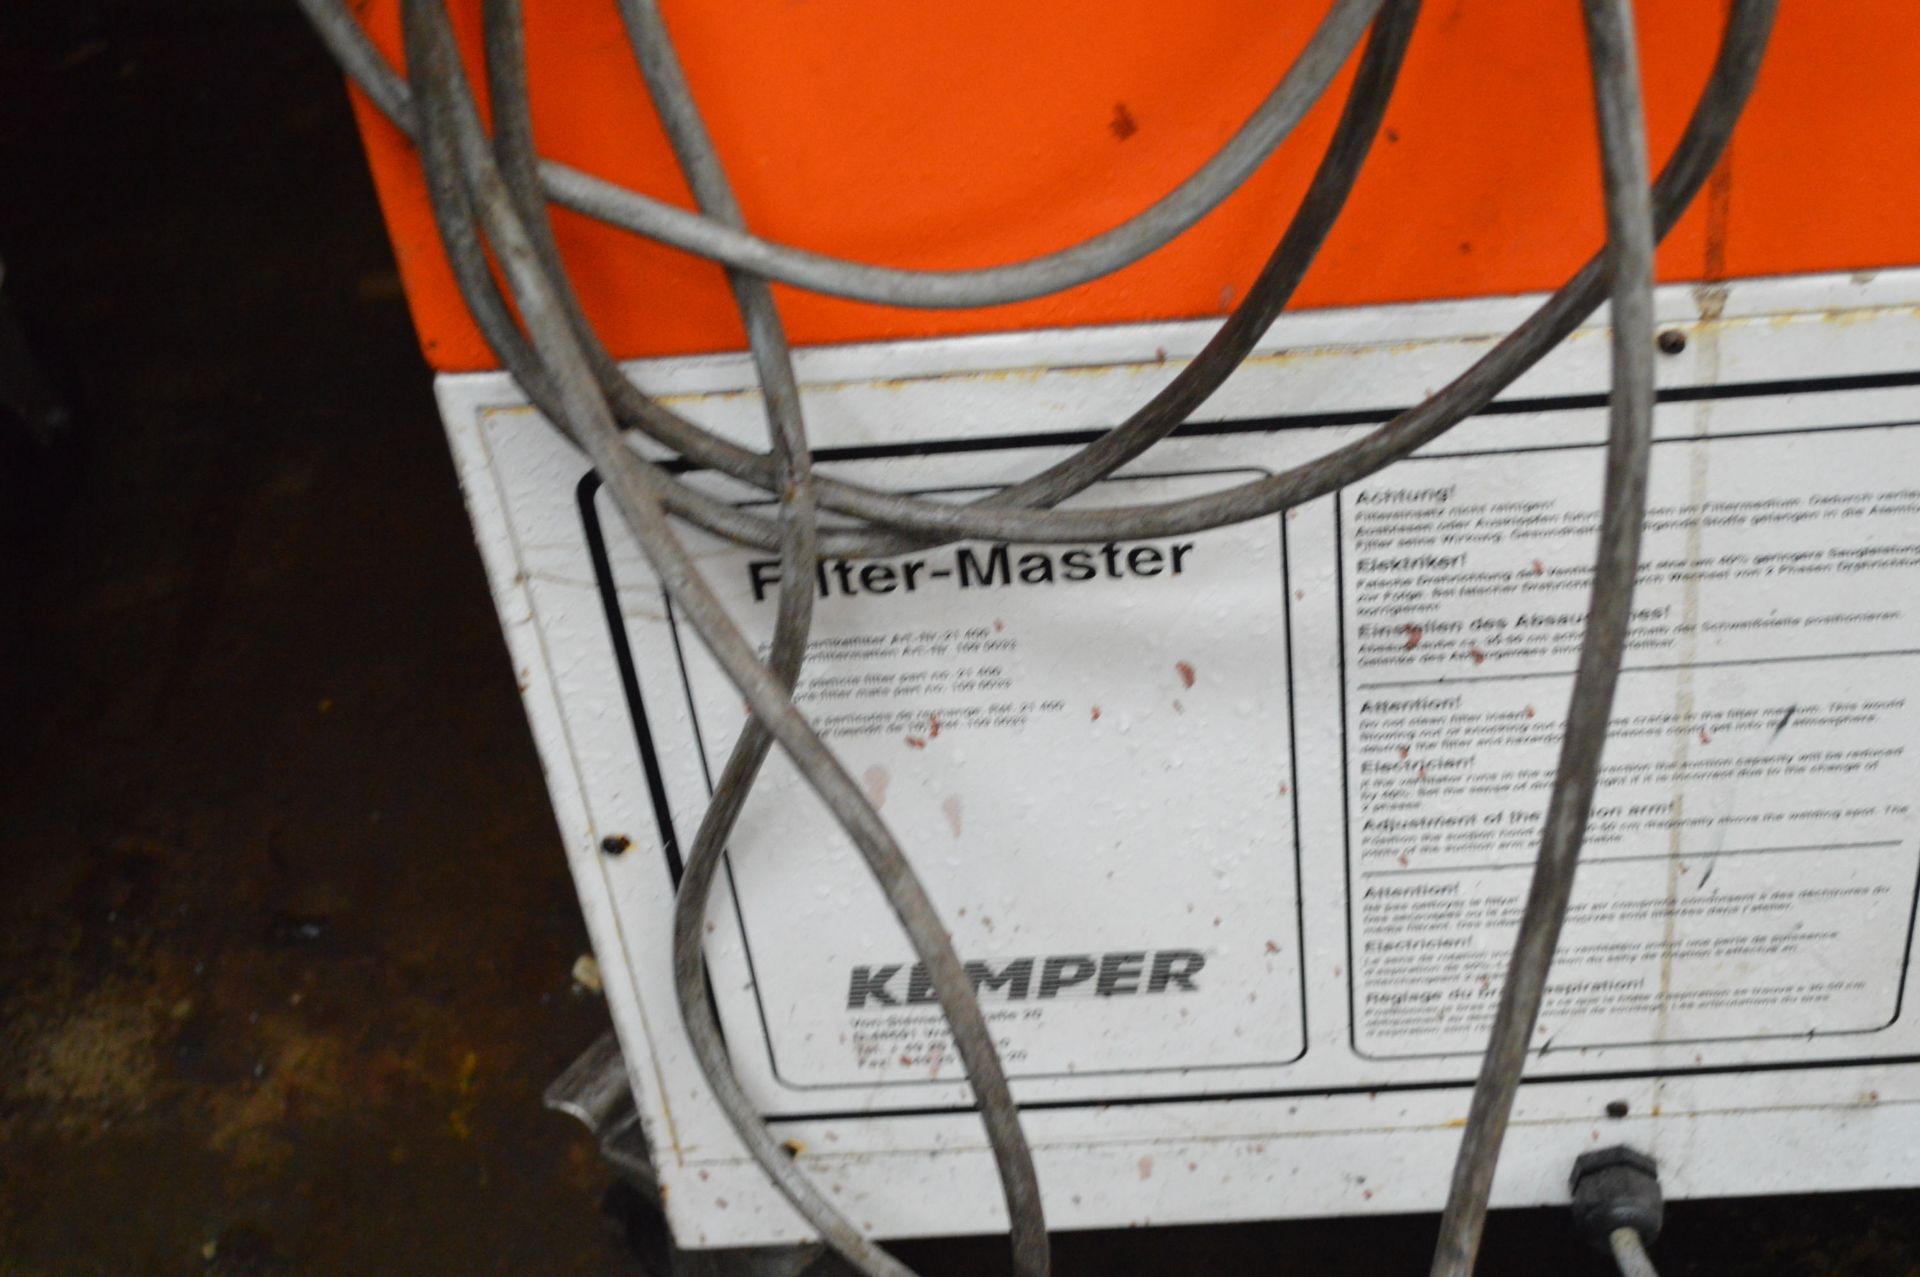 Kemper Filter Master Articulated Arm Fume Extraction Unit (no arm) - Image 3 of 3